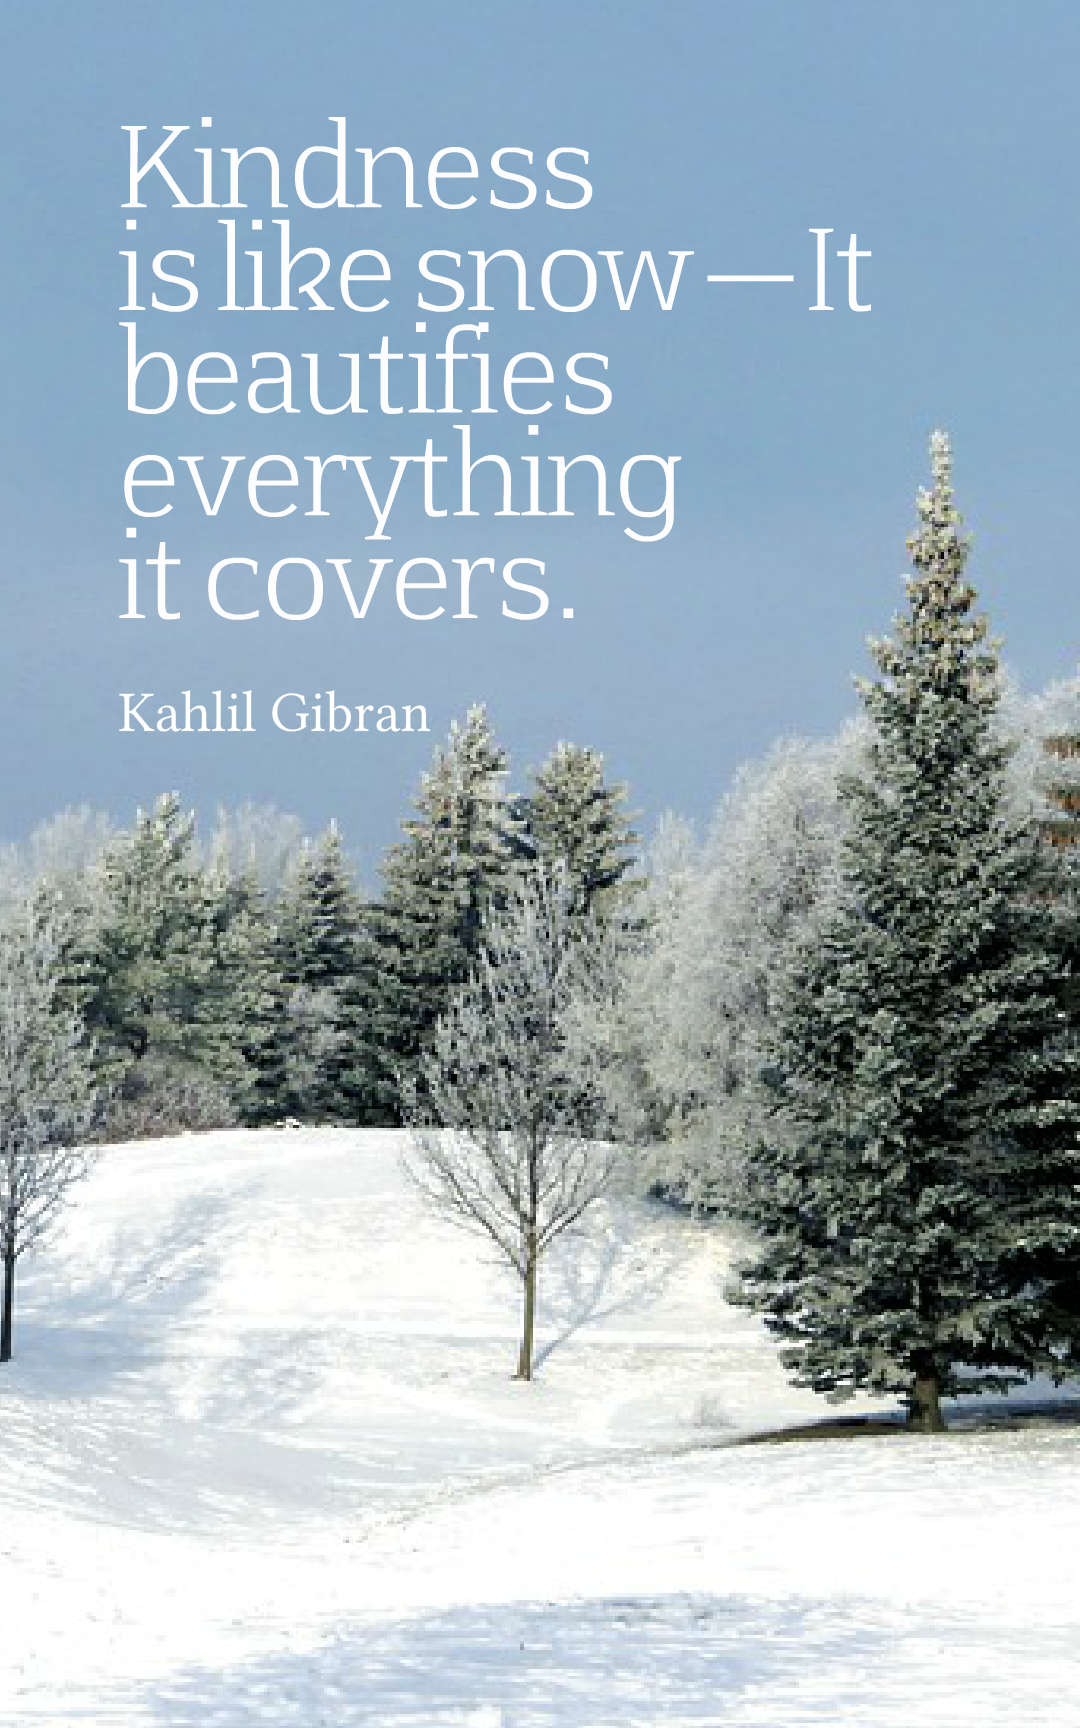 Kindness is like snow—It beautifies everything it covers.